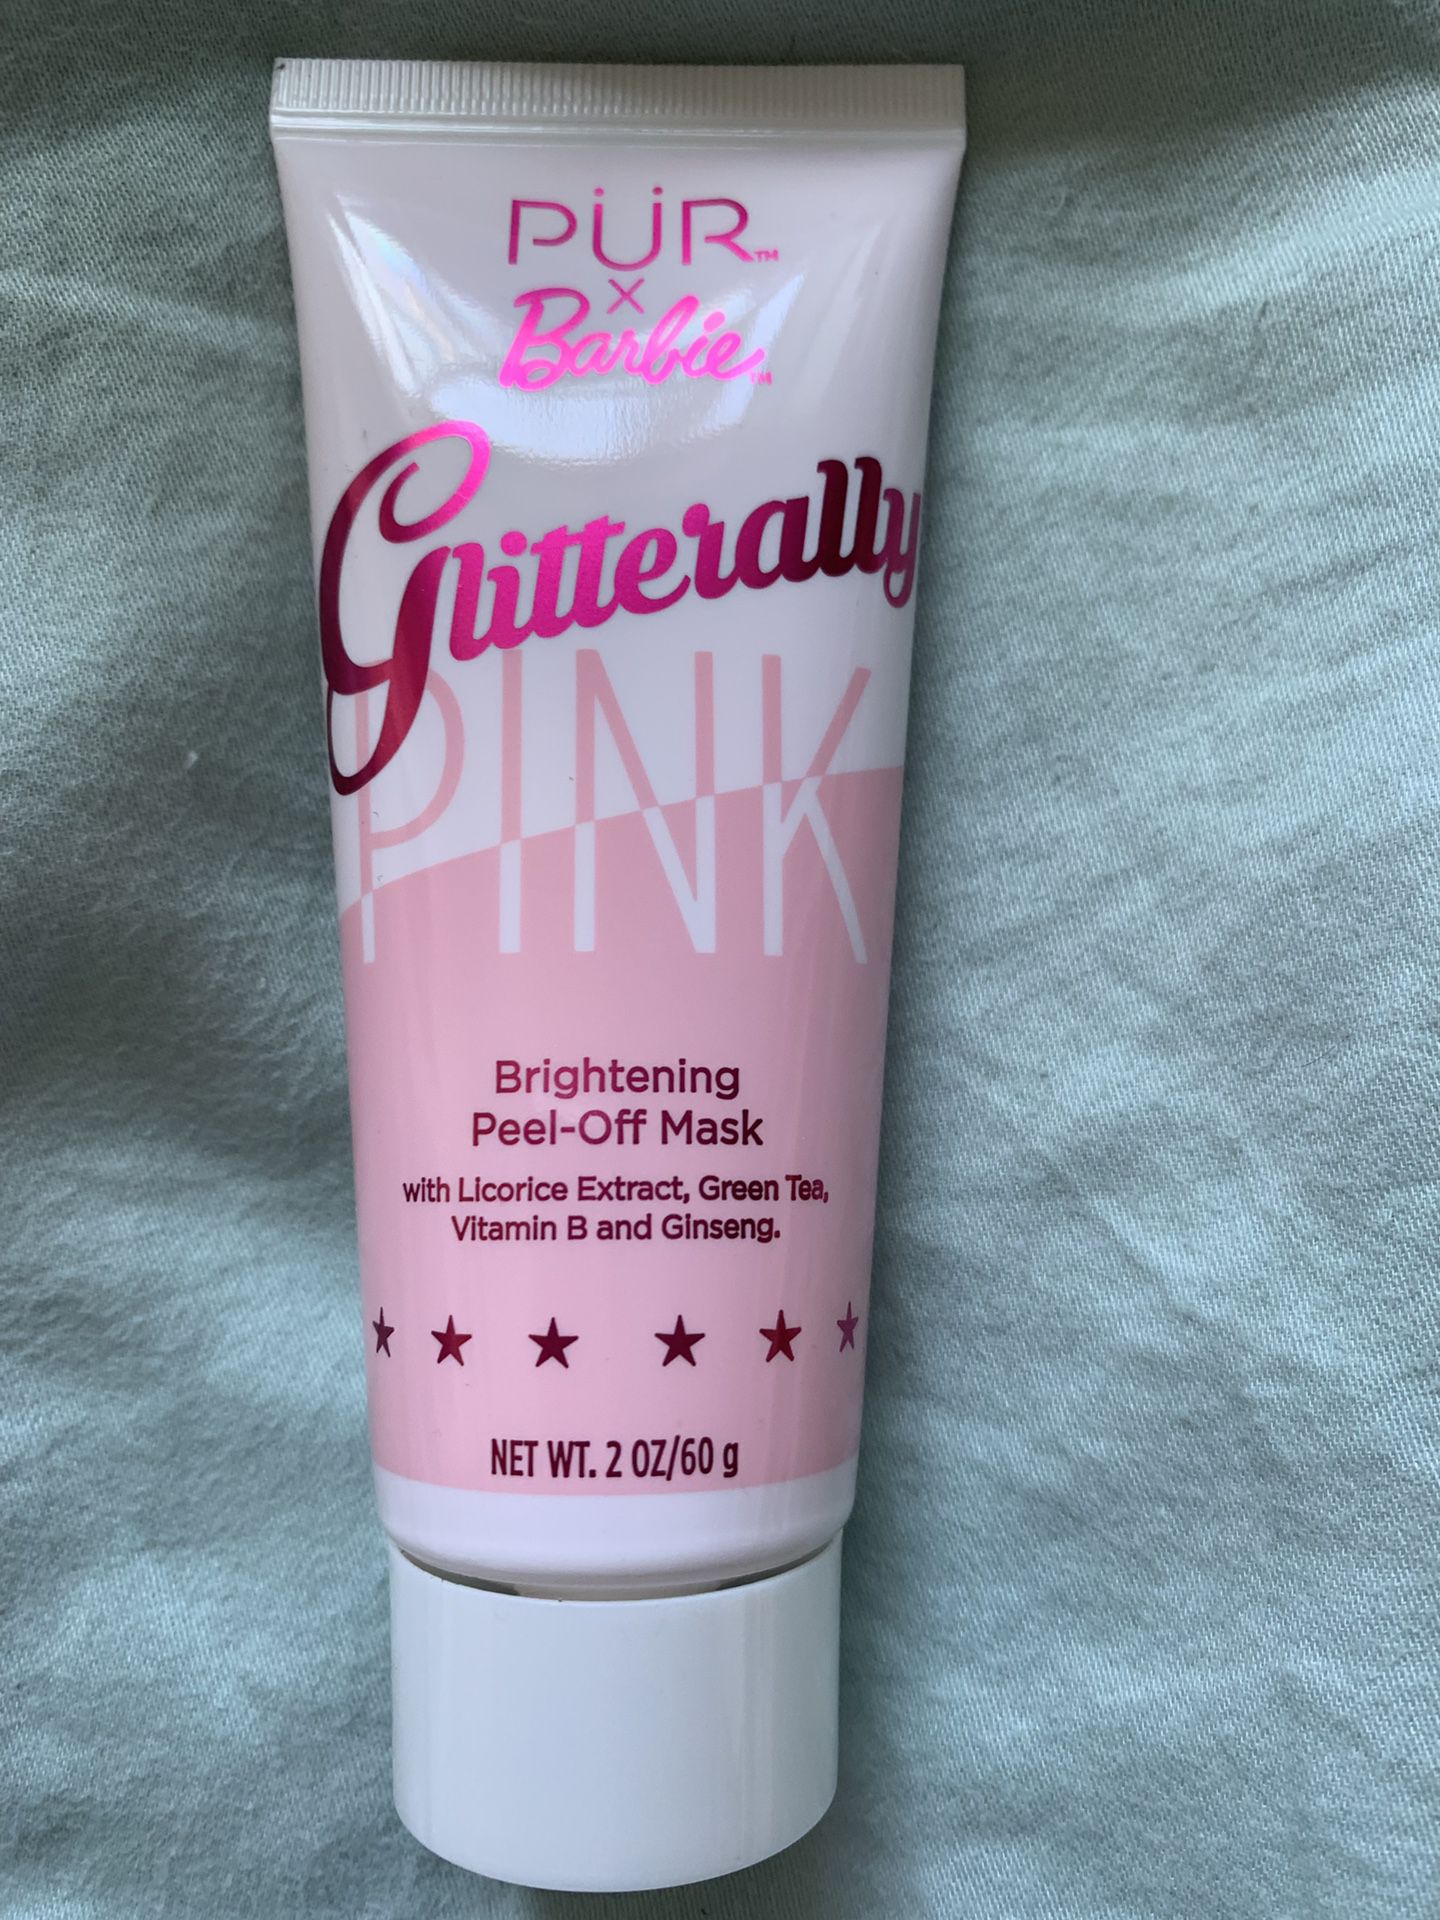 PUR X Barbie Glitterally Pink brightening peel-off face mask